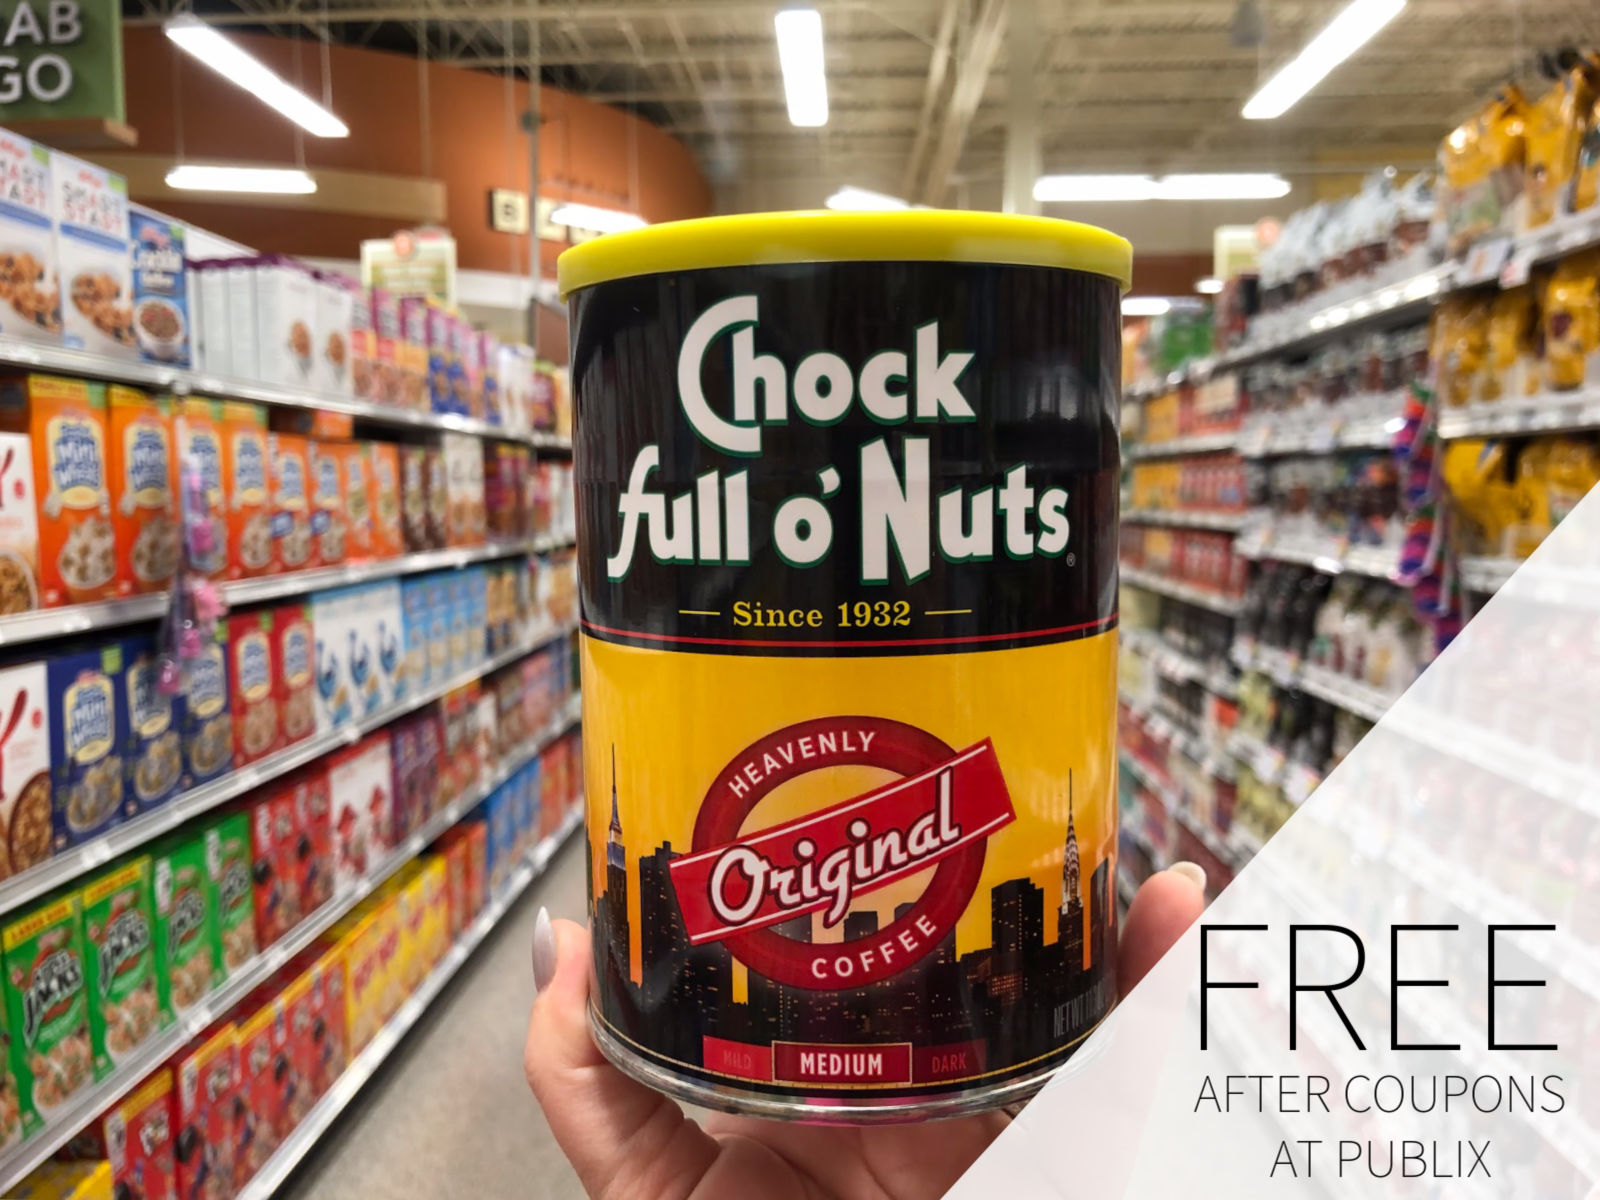 Save Big On Chock full o’Nuts® At Publix – $2 Coupon Valid Through 12/31